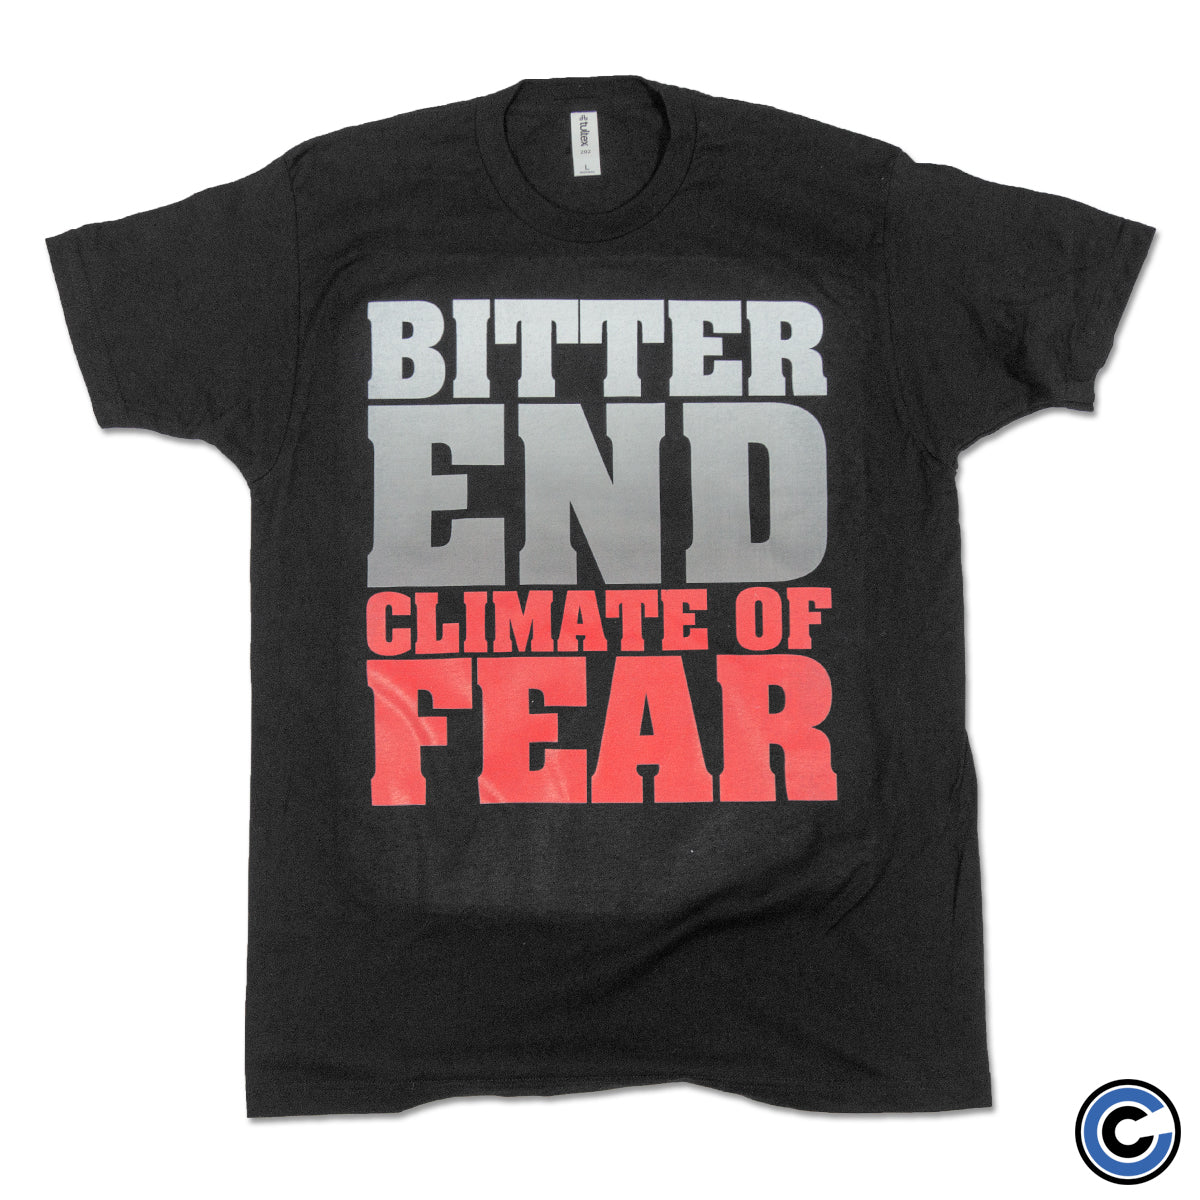 Bitter End "Climate of Fear" Shirt